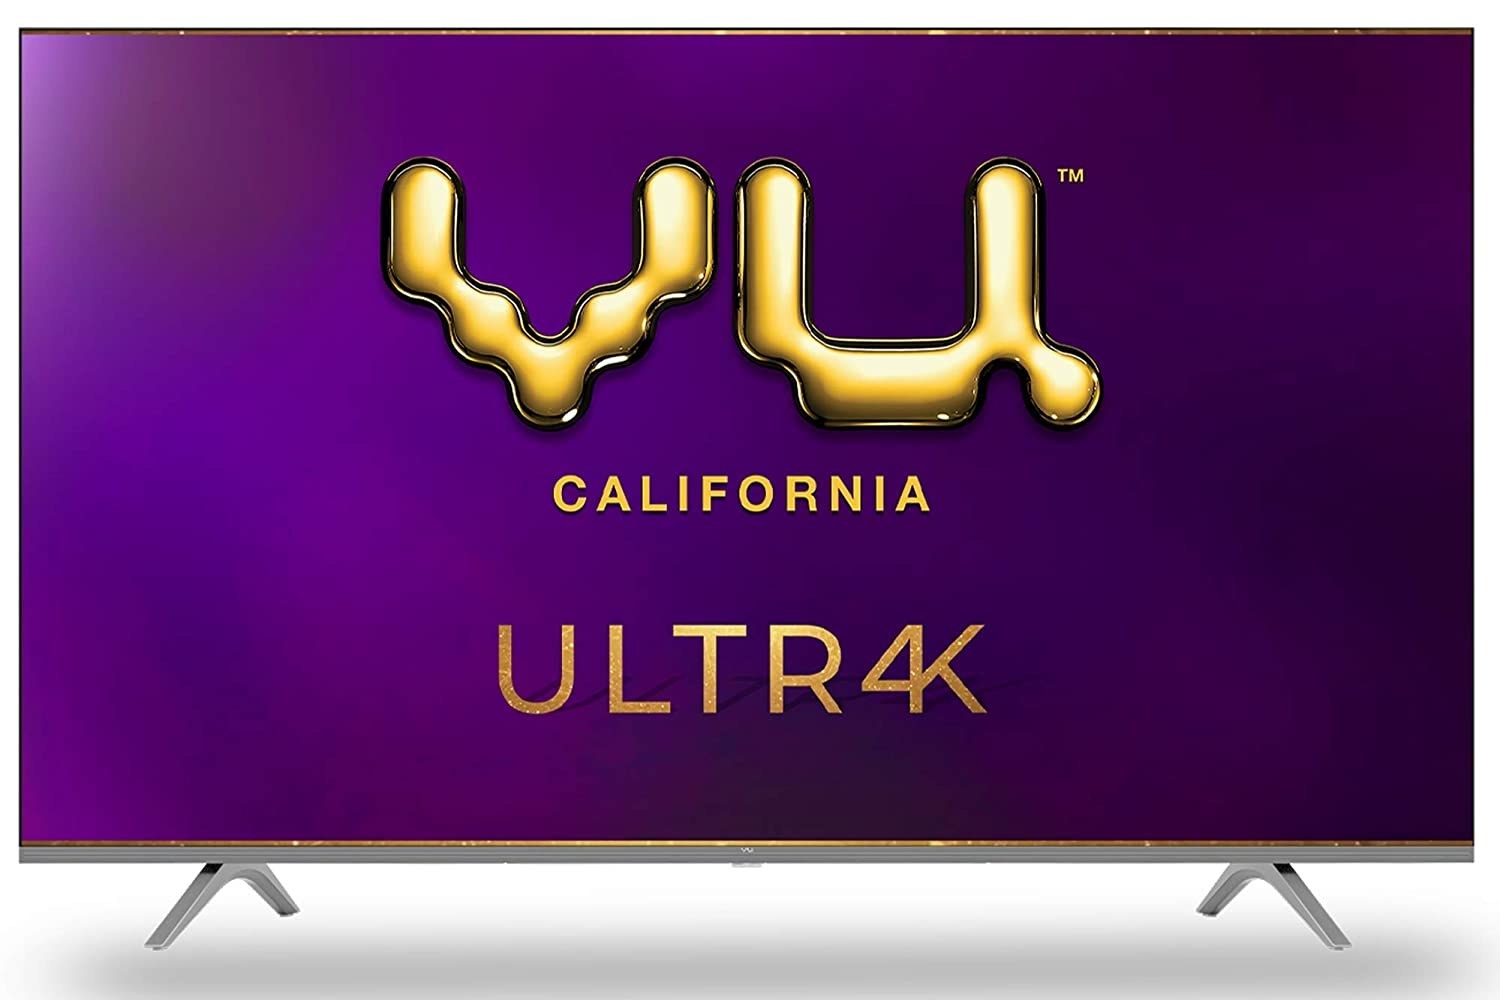 VU TV with the purple loading screen